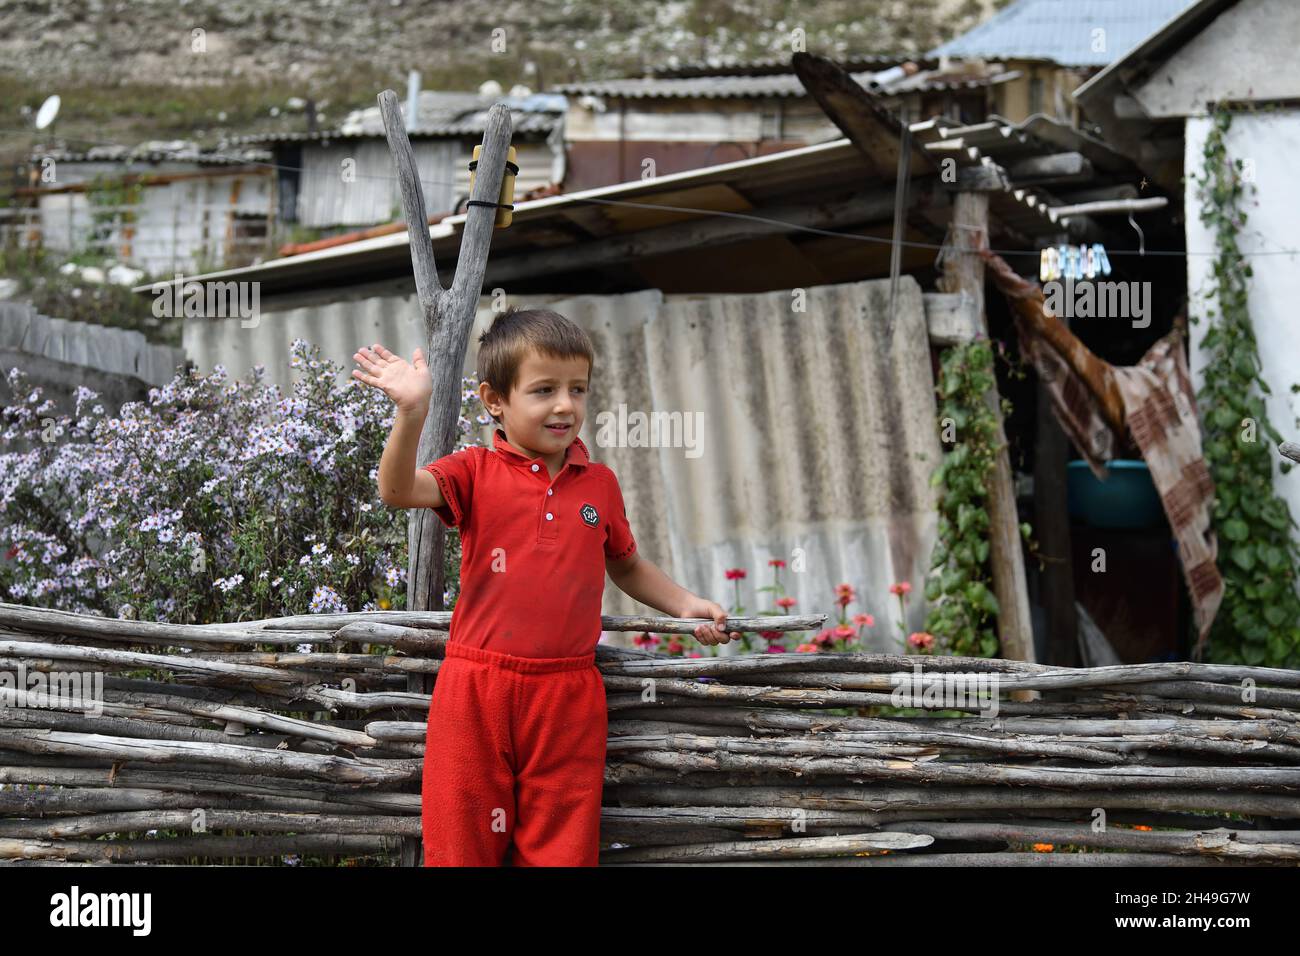 Chechnya, Russia - Sept 12, 2021: Little Chechen boy shown at his house with a welcome hand gesture Stock Photo